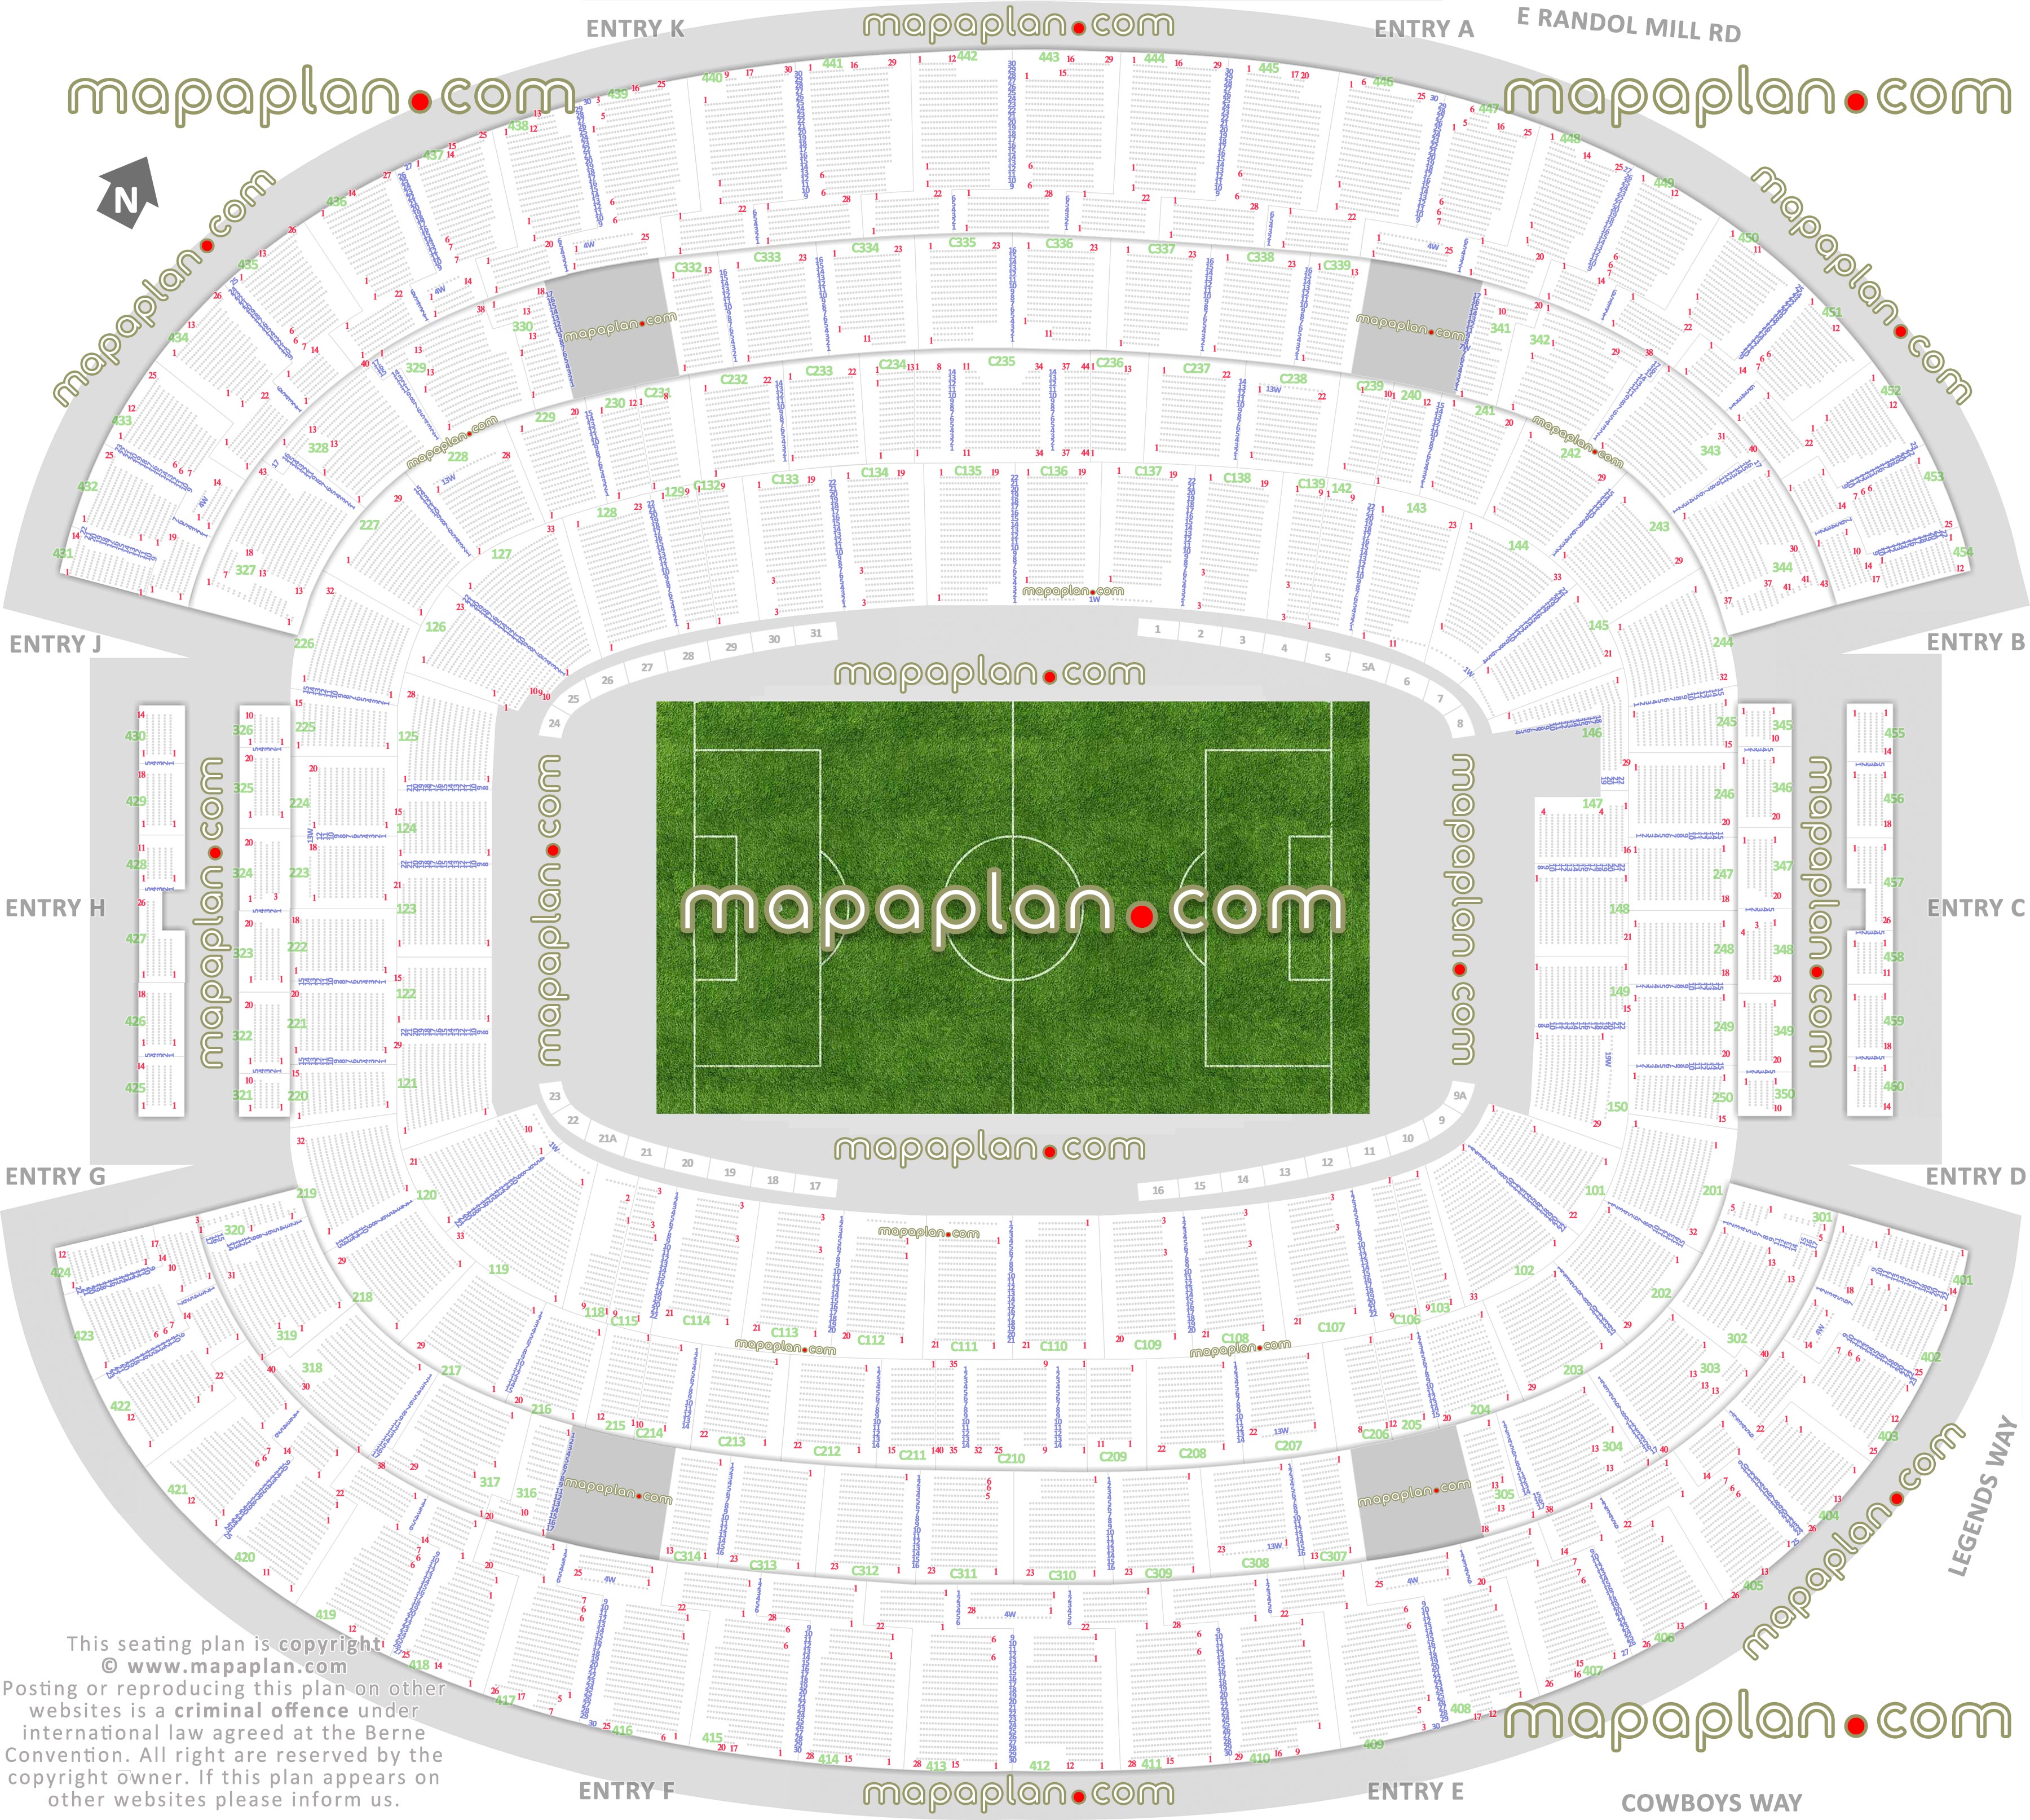 soccer games arena seating capacity arrangement diagram att stadium dallas cowboys arena tx usa best seat finder interactive virtual 3d detailed layout tool precise detailed aisle seat loge box rows numbering location data plan full exact row numbers plan seats row lower hall fame main mezzanine upper concourse level baseline sideline corner seats Dallas Cowboys ATT Stadium seating chart